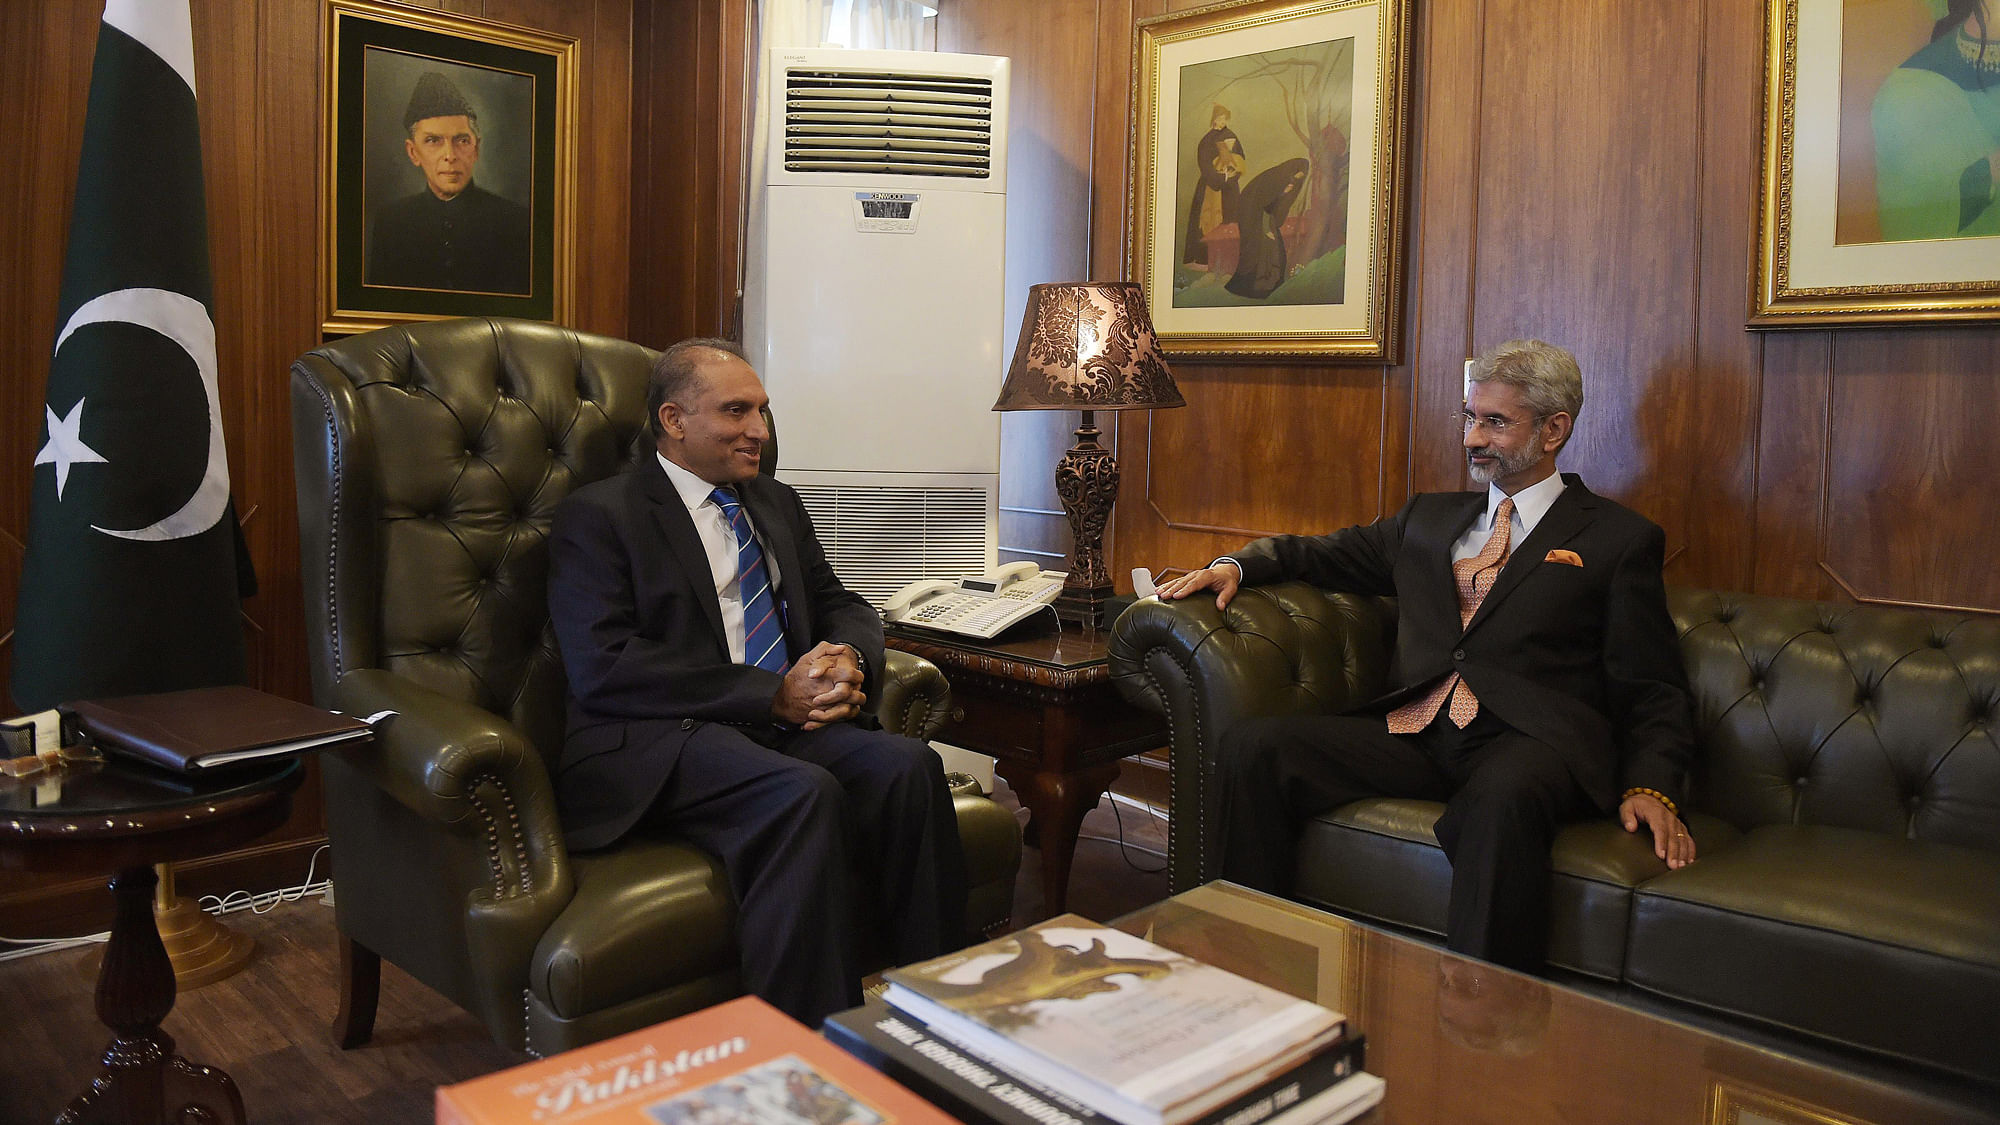 File photo of Indian Foreign Secretary Subrahmanyan Jaishankar, right, meets with his Pakistani counterpart Aizaz Chaudhry during a  discussion at the Foreign Ministry in Islamabad. (Photo: AP)